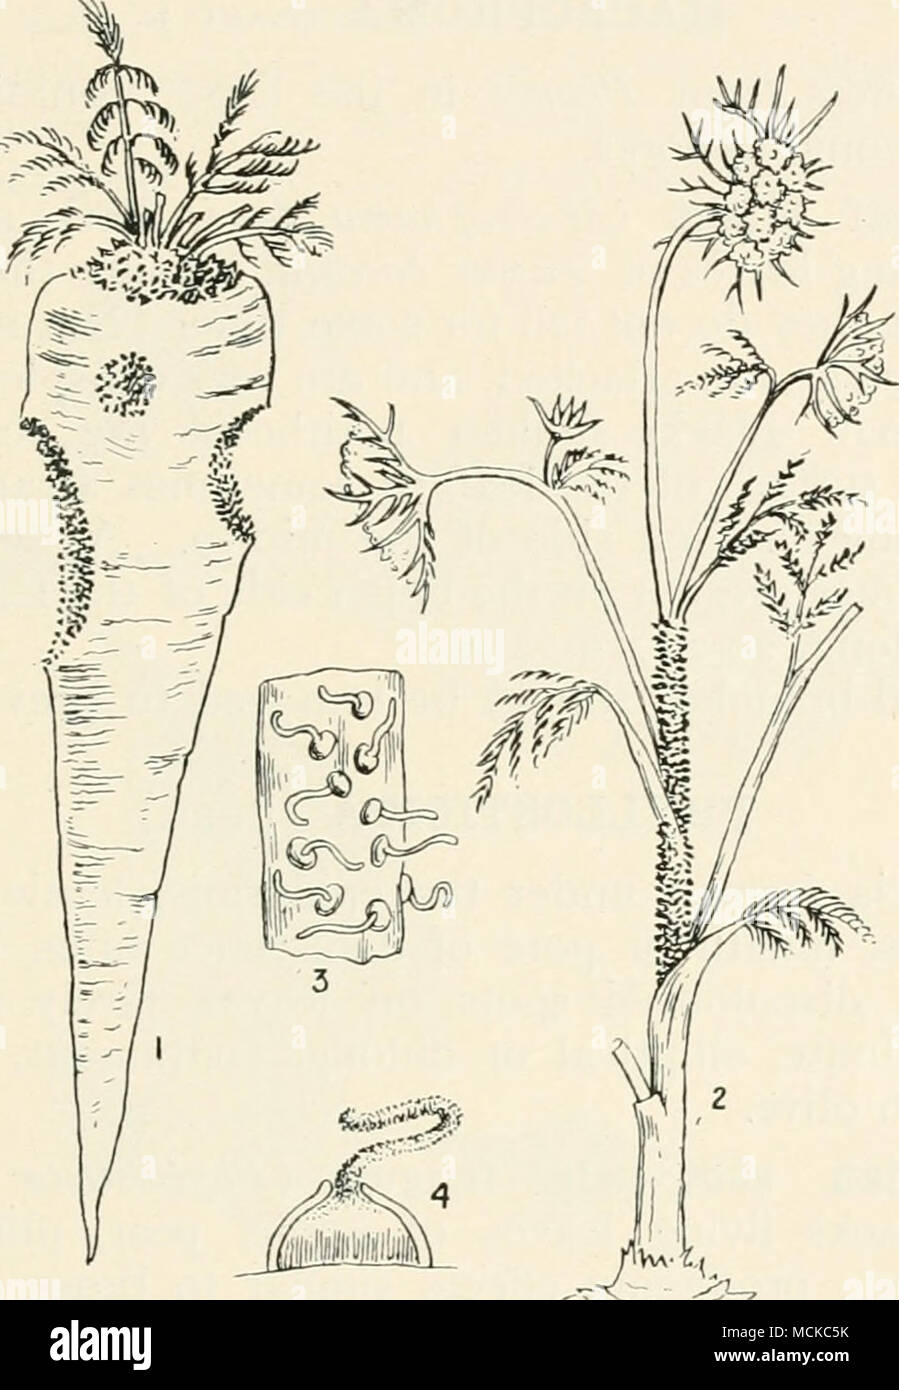 . Fig. 127.—Phoma sanguinolenta. i, diseased carrot; 2, diseased carrot flowering stem ; 3, portion of a diseased spot showing perithecia with the conidia escaping as a viscid tendril ; 4, section of a perithecium with the conidia oozing out in a tendril. Figs. 1 and 2 reduced; remainder mag. Phoma solanicola (Prill, and Del.) attacks the haulm of the potato, forming large, oblong, whitish or clear yellow spots, which eventually become dotted over with the minute, blackish perithecia of the fungus. When the lateral branches are attacked the leaves soon wither, and when several branches are att Stock Photo